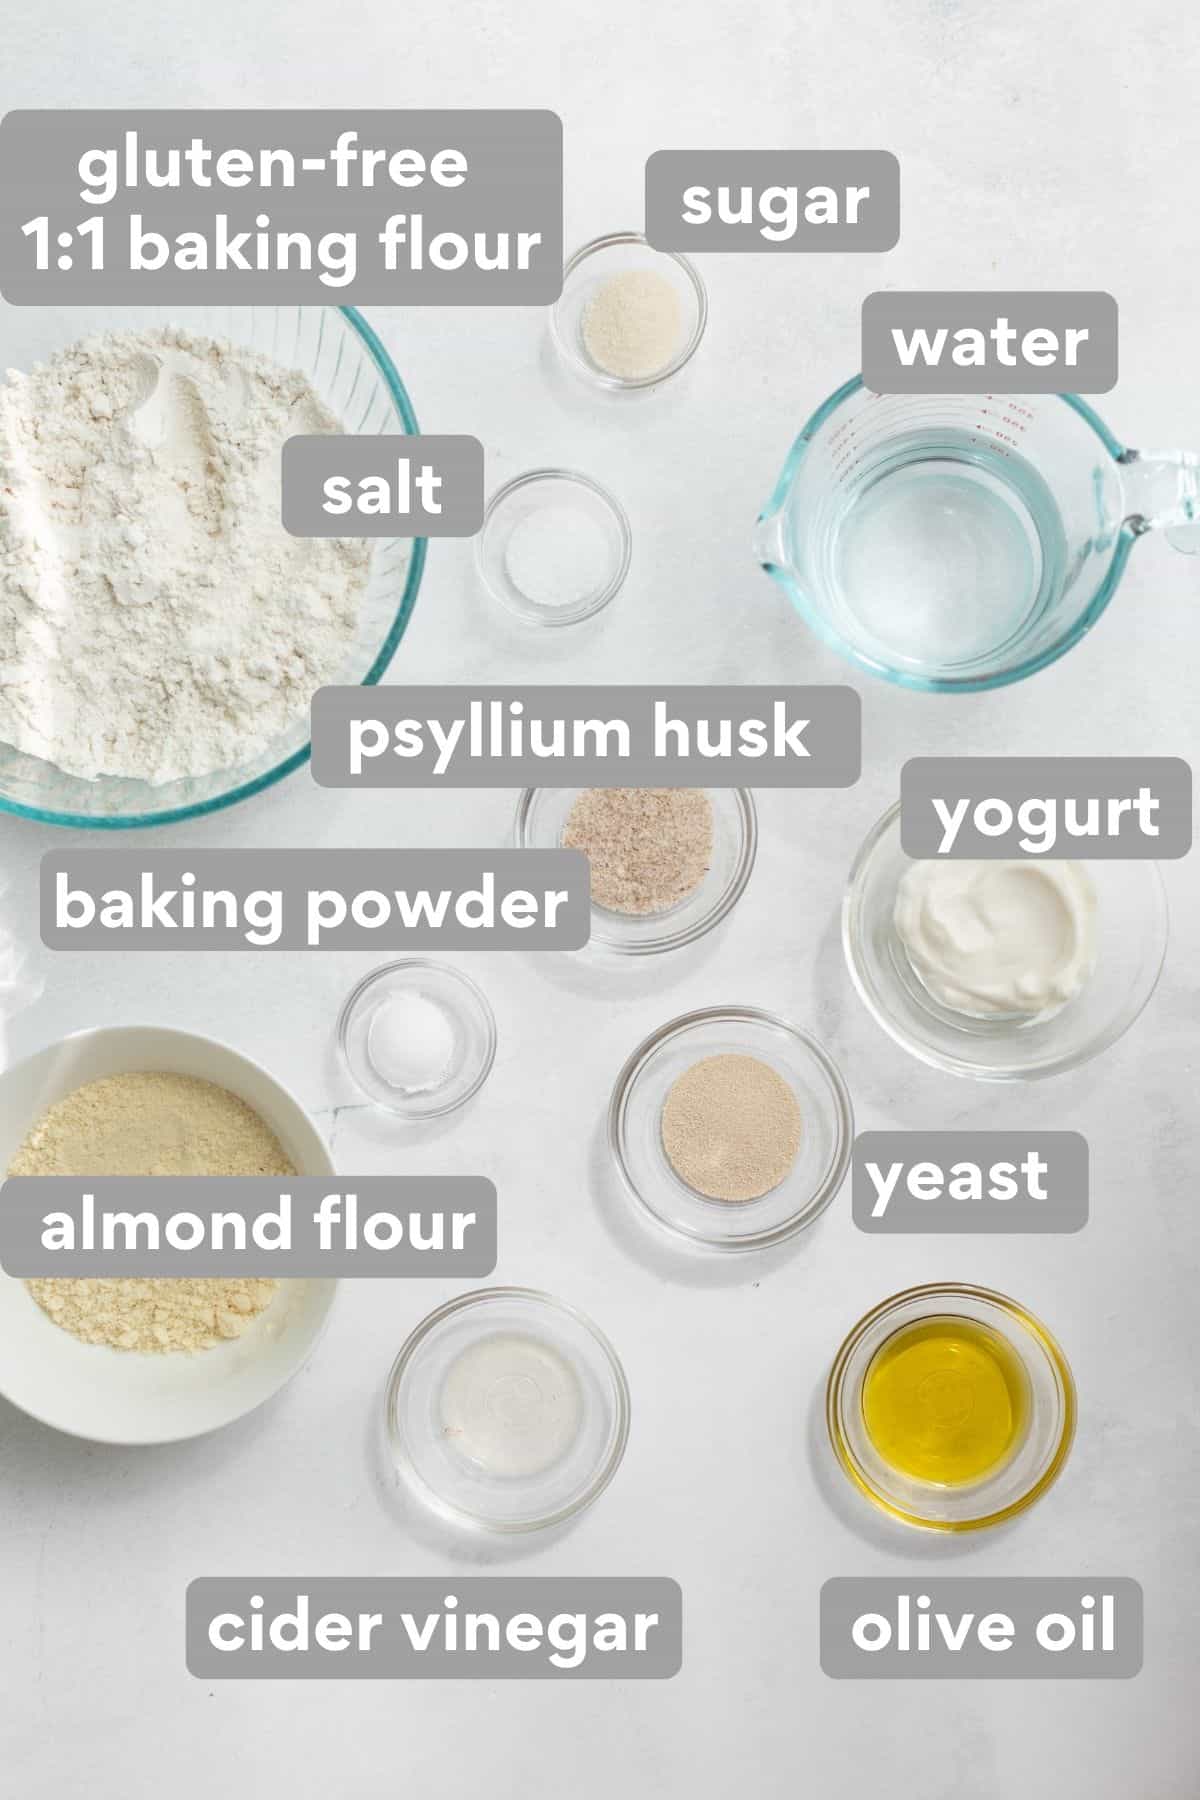 Flatbread ingredients on a countertop